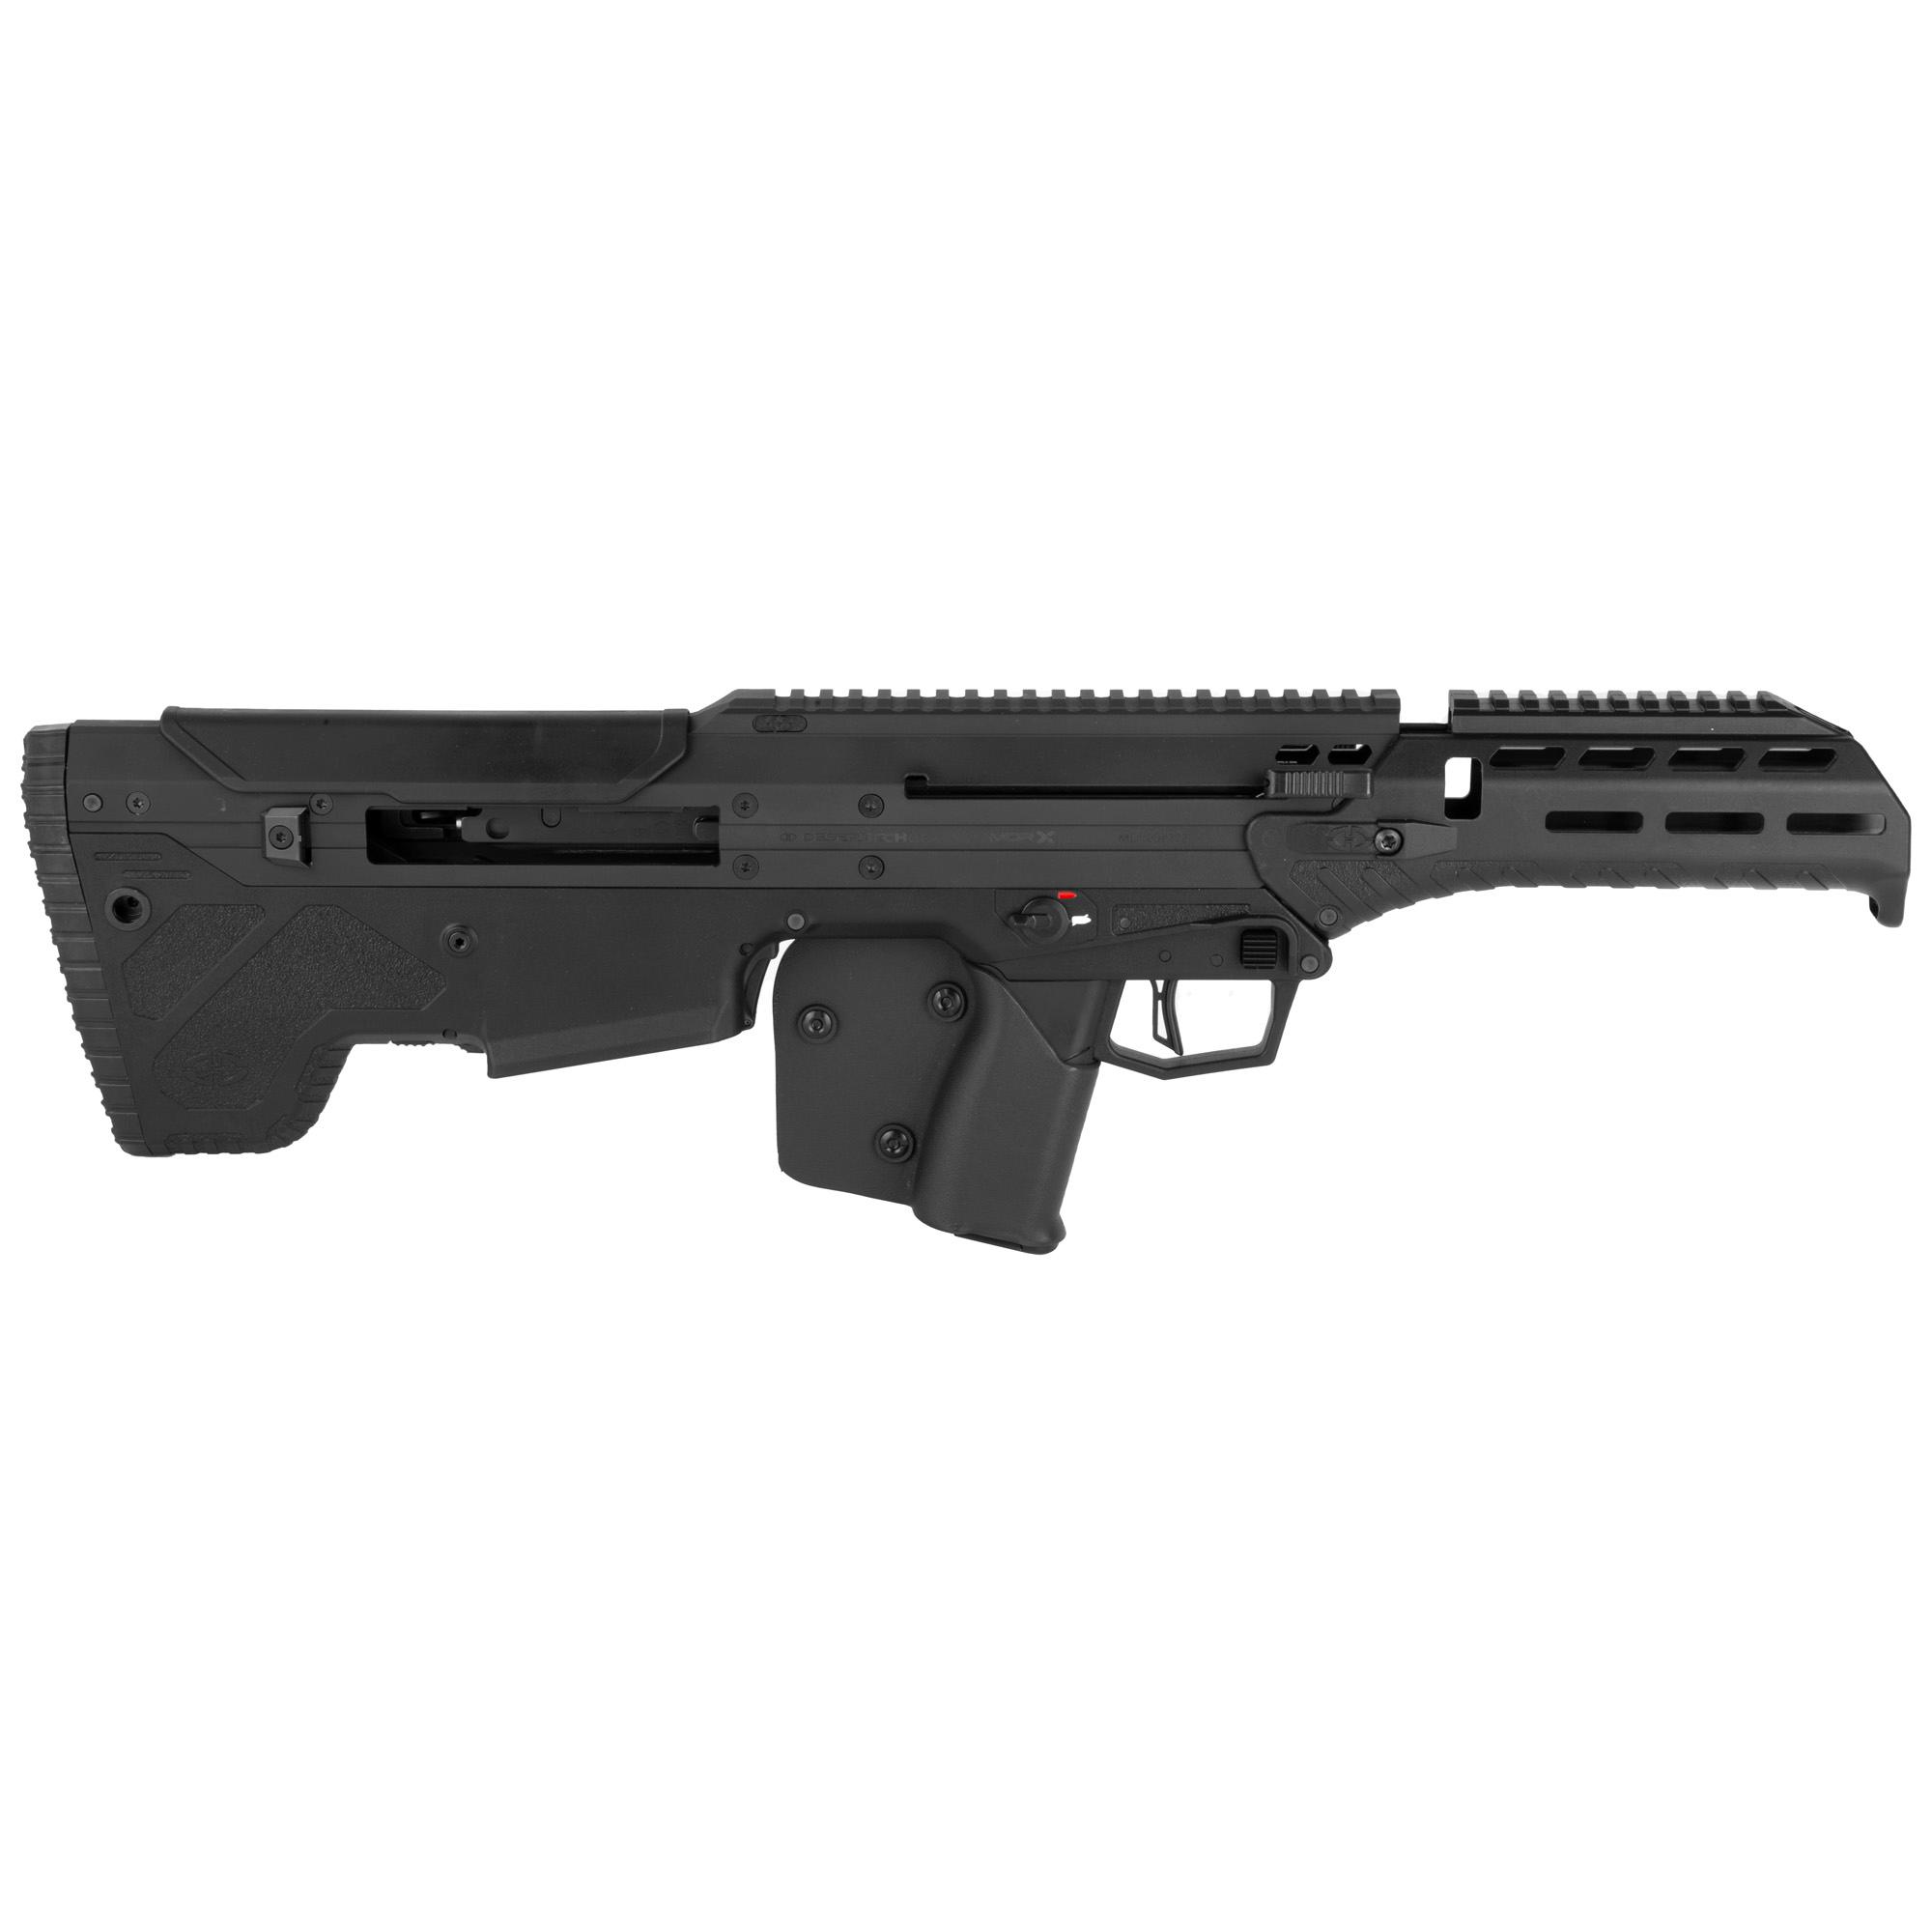 Long Guns DT MDRX CHASSIS FRWRD CA BLK image 2